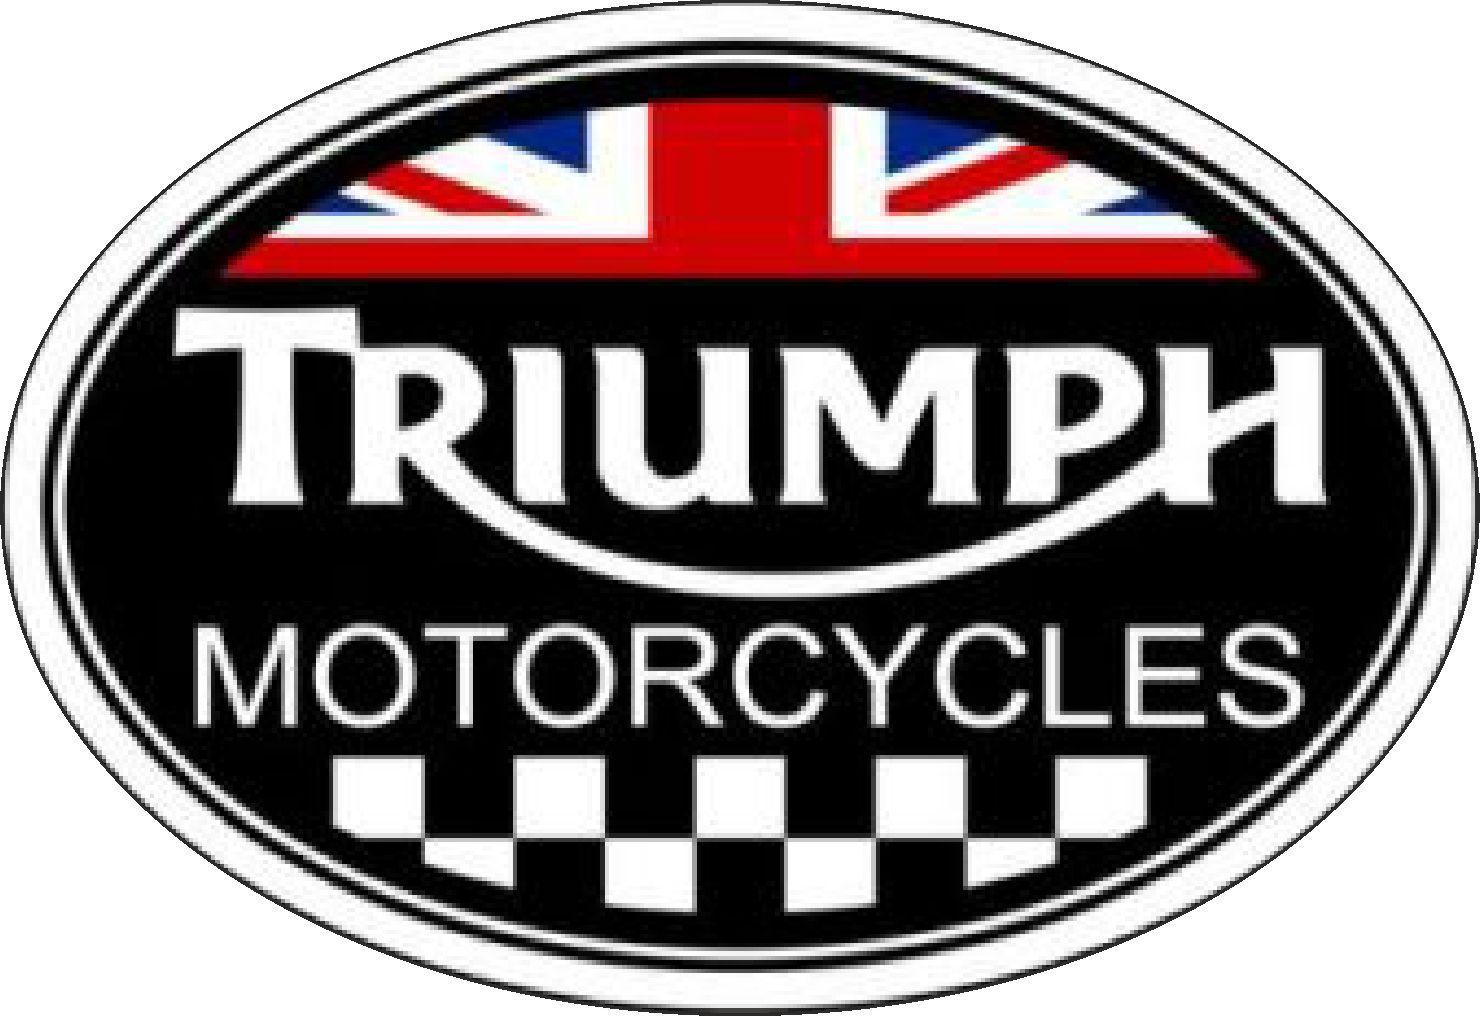 Triumph Motorcycle Logo - Triumph Motorcyles fined $2.9 million over defect data | Protecting ...